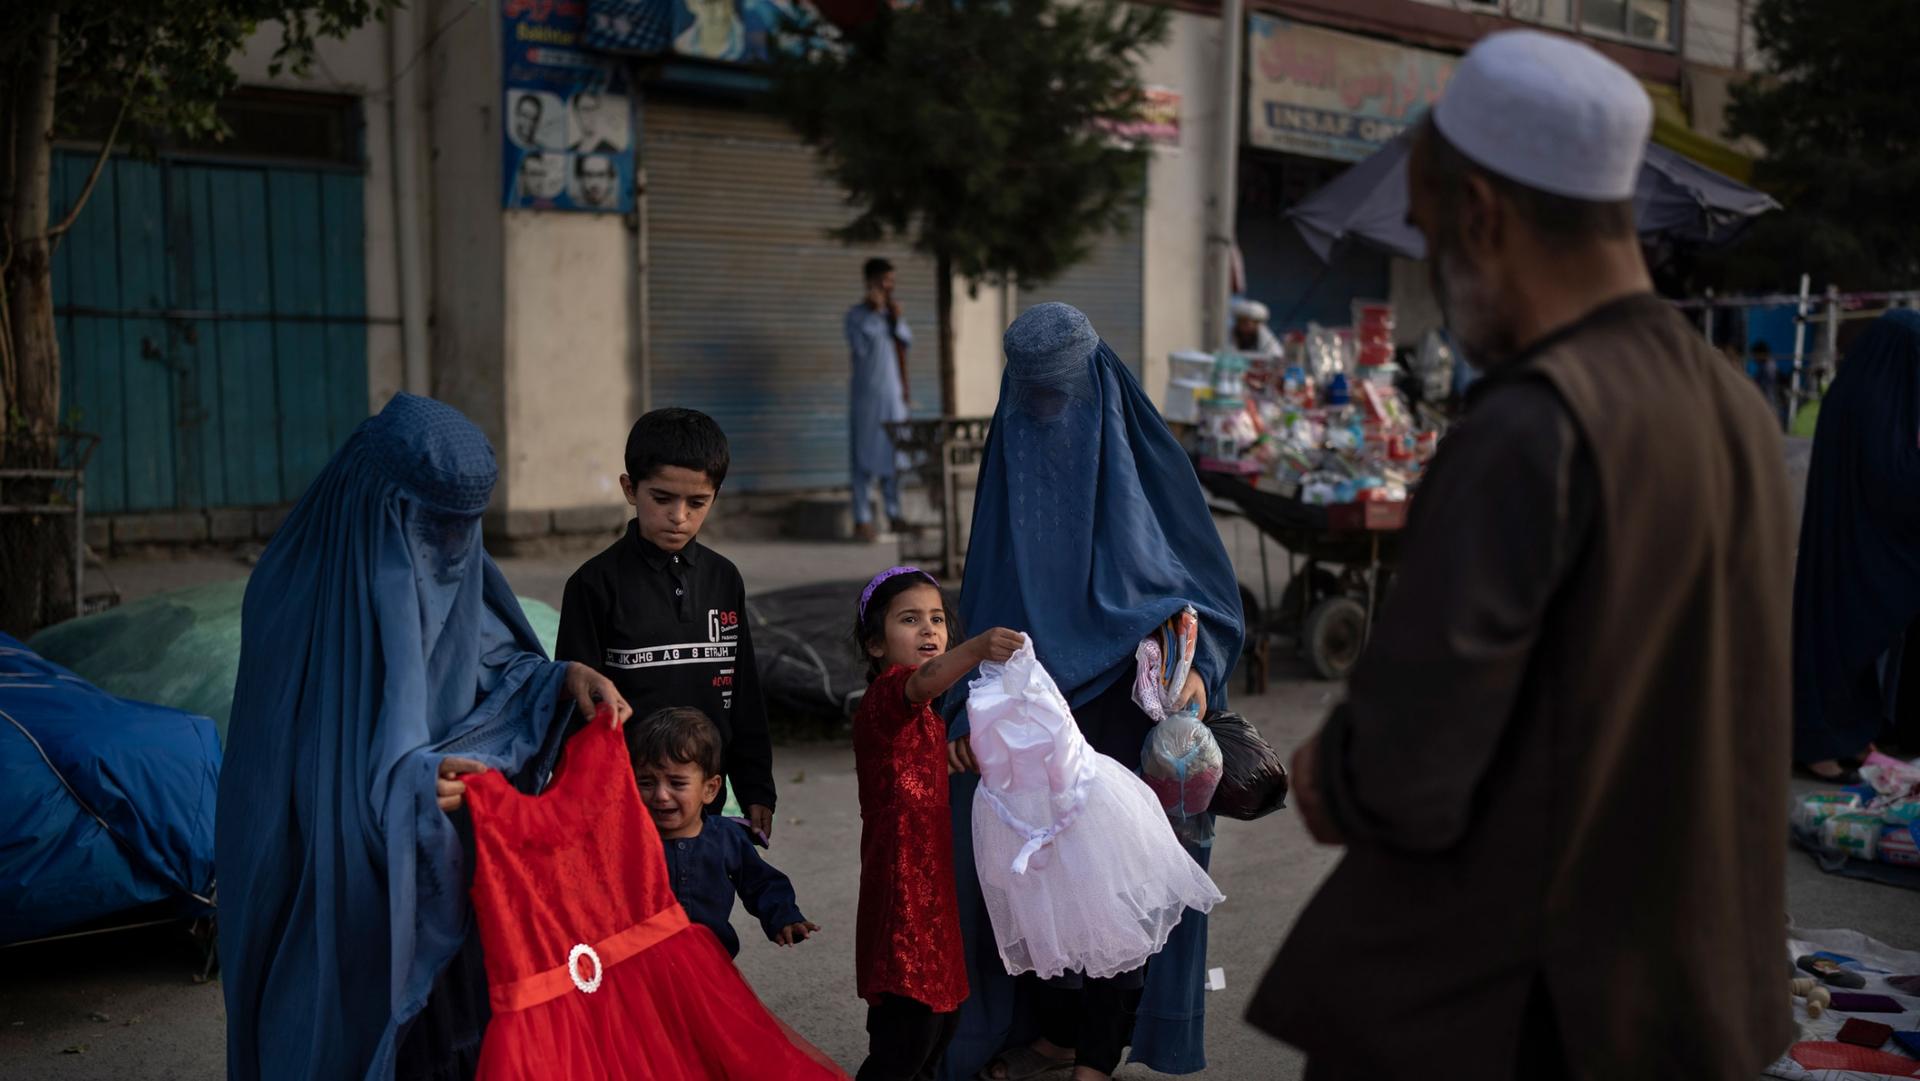 fghan women and a girl shop for dresses at a local market in Kabul, Afghanistan, Friday, Sept. 10, 2021.